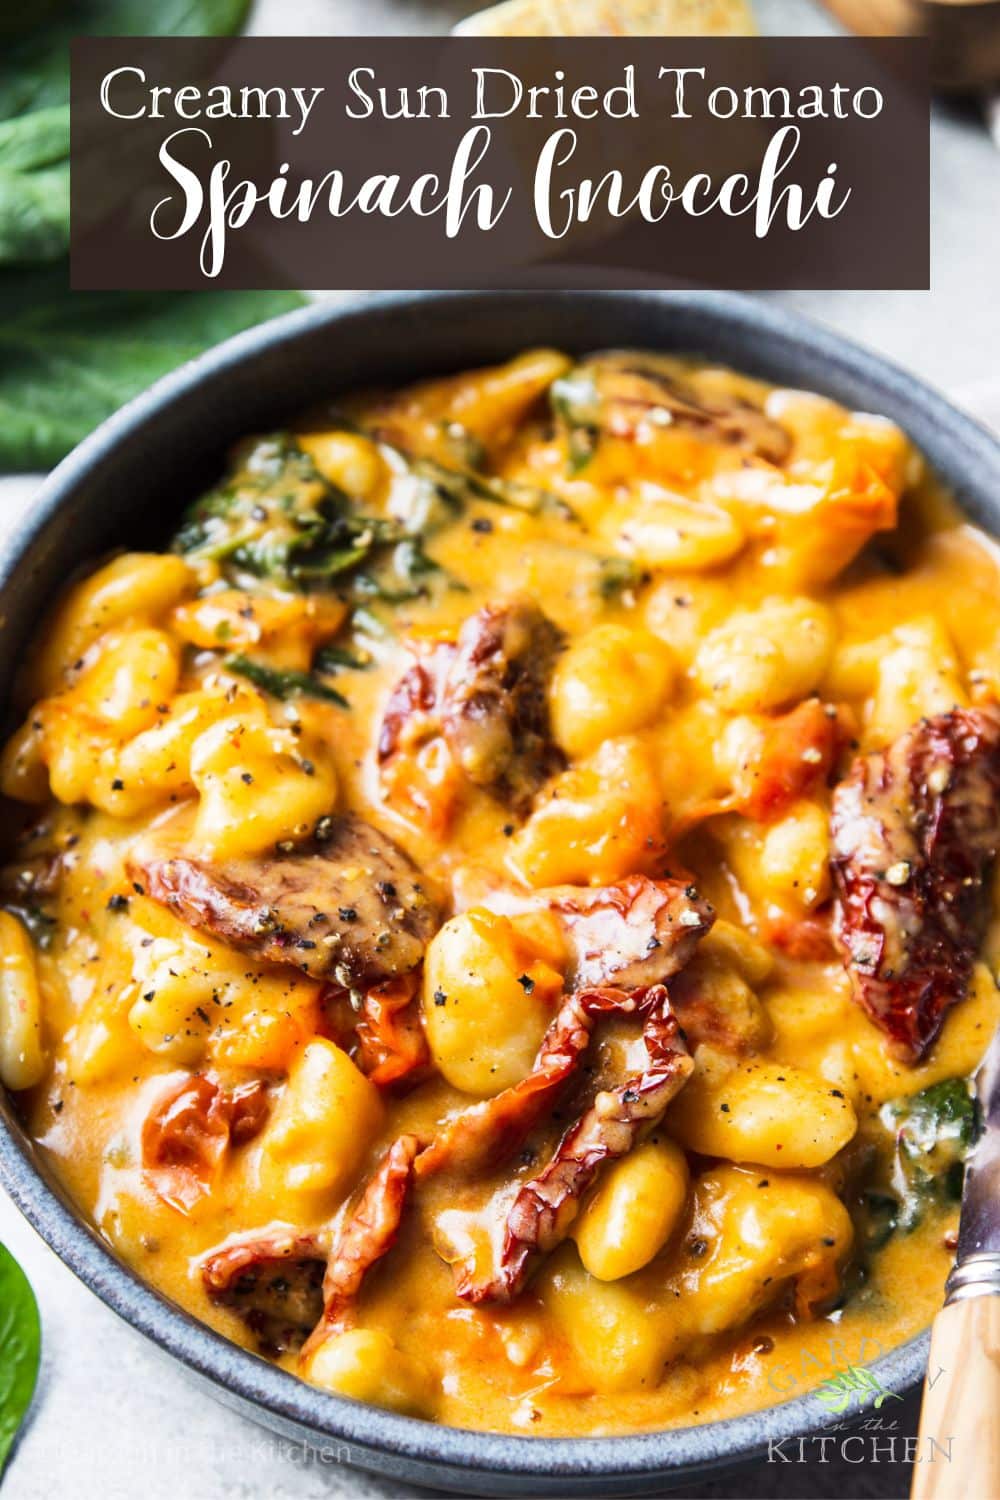 pinterest image of sun dried tomatoes and gnocchi in a cheesy, creamy sauce in a gray bowl.